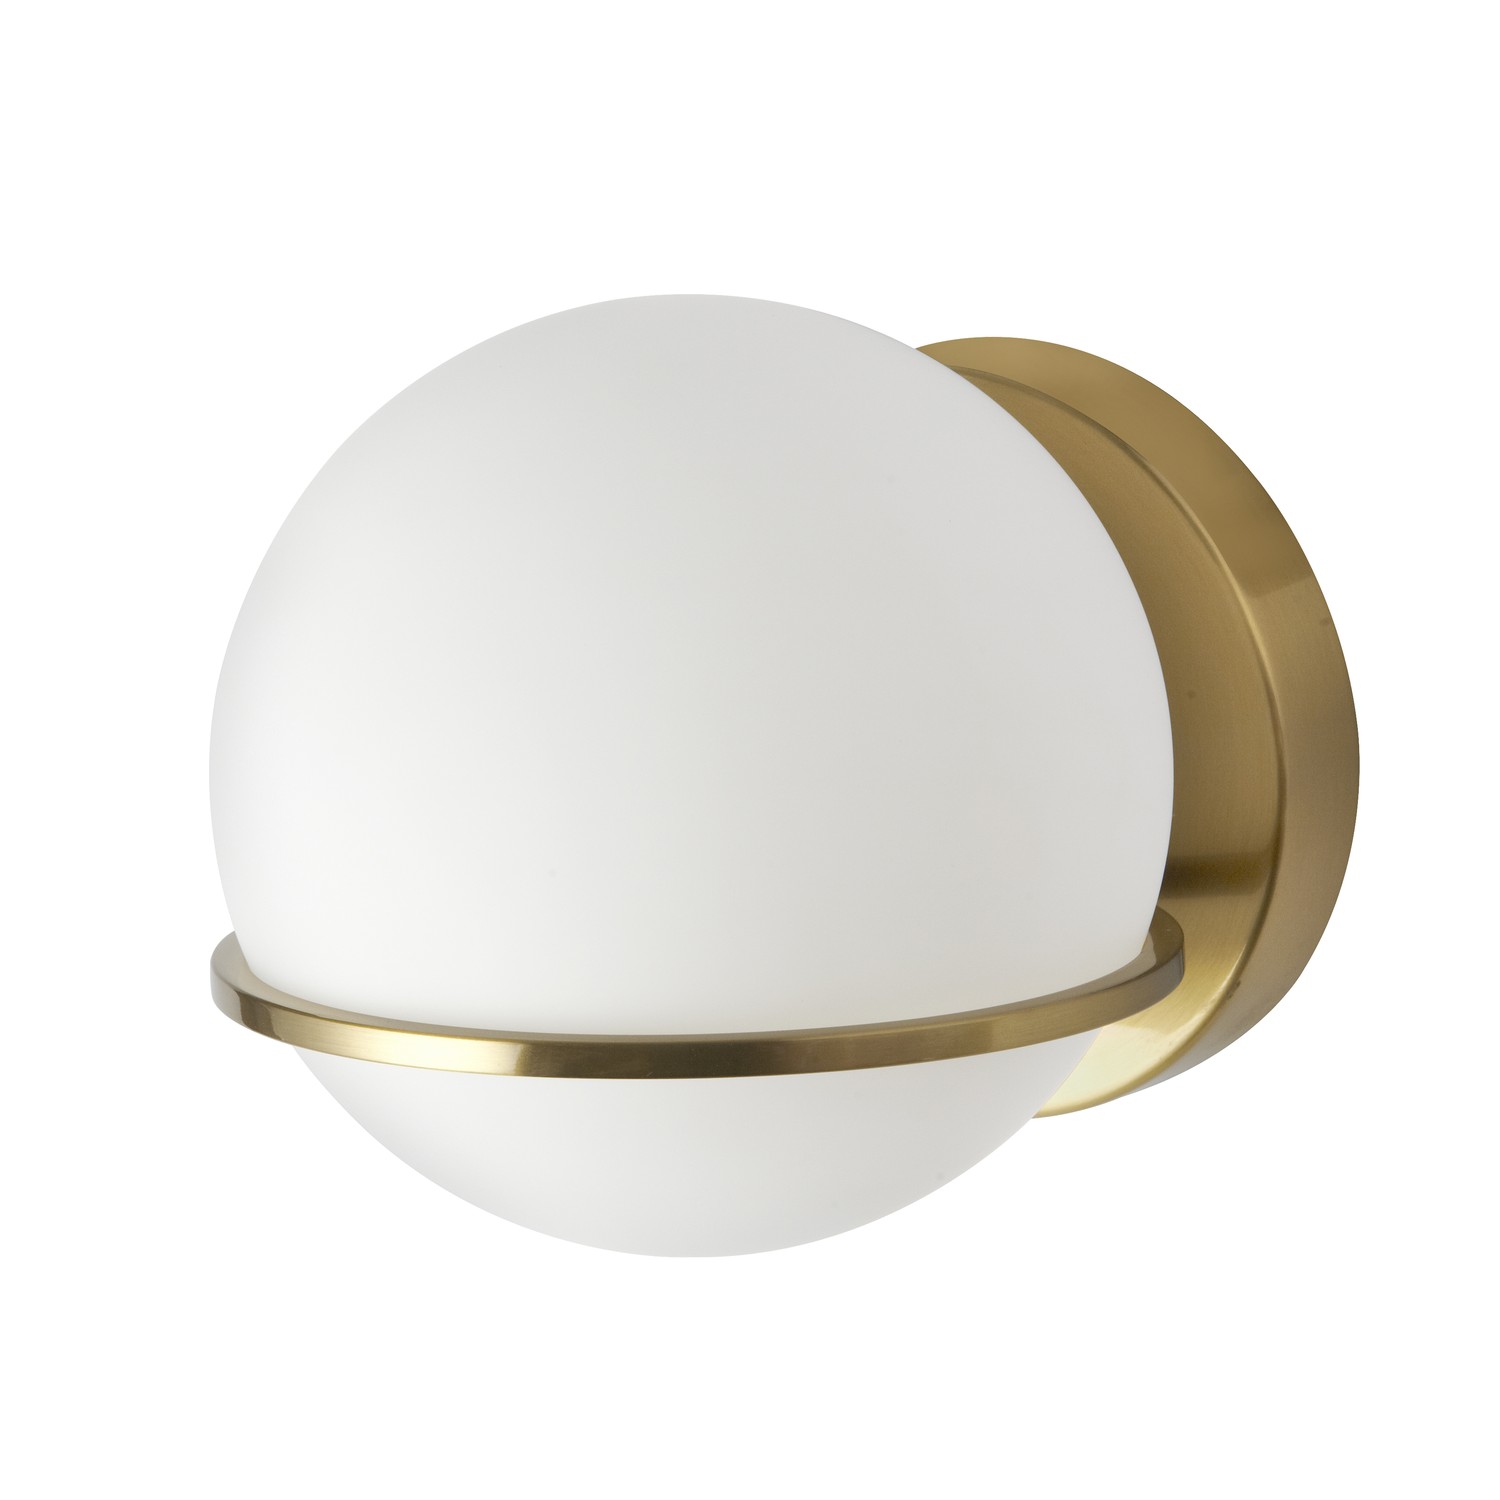 1 Light Halogen Wall Sconce, Aged Brass with White Opal Glass